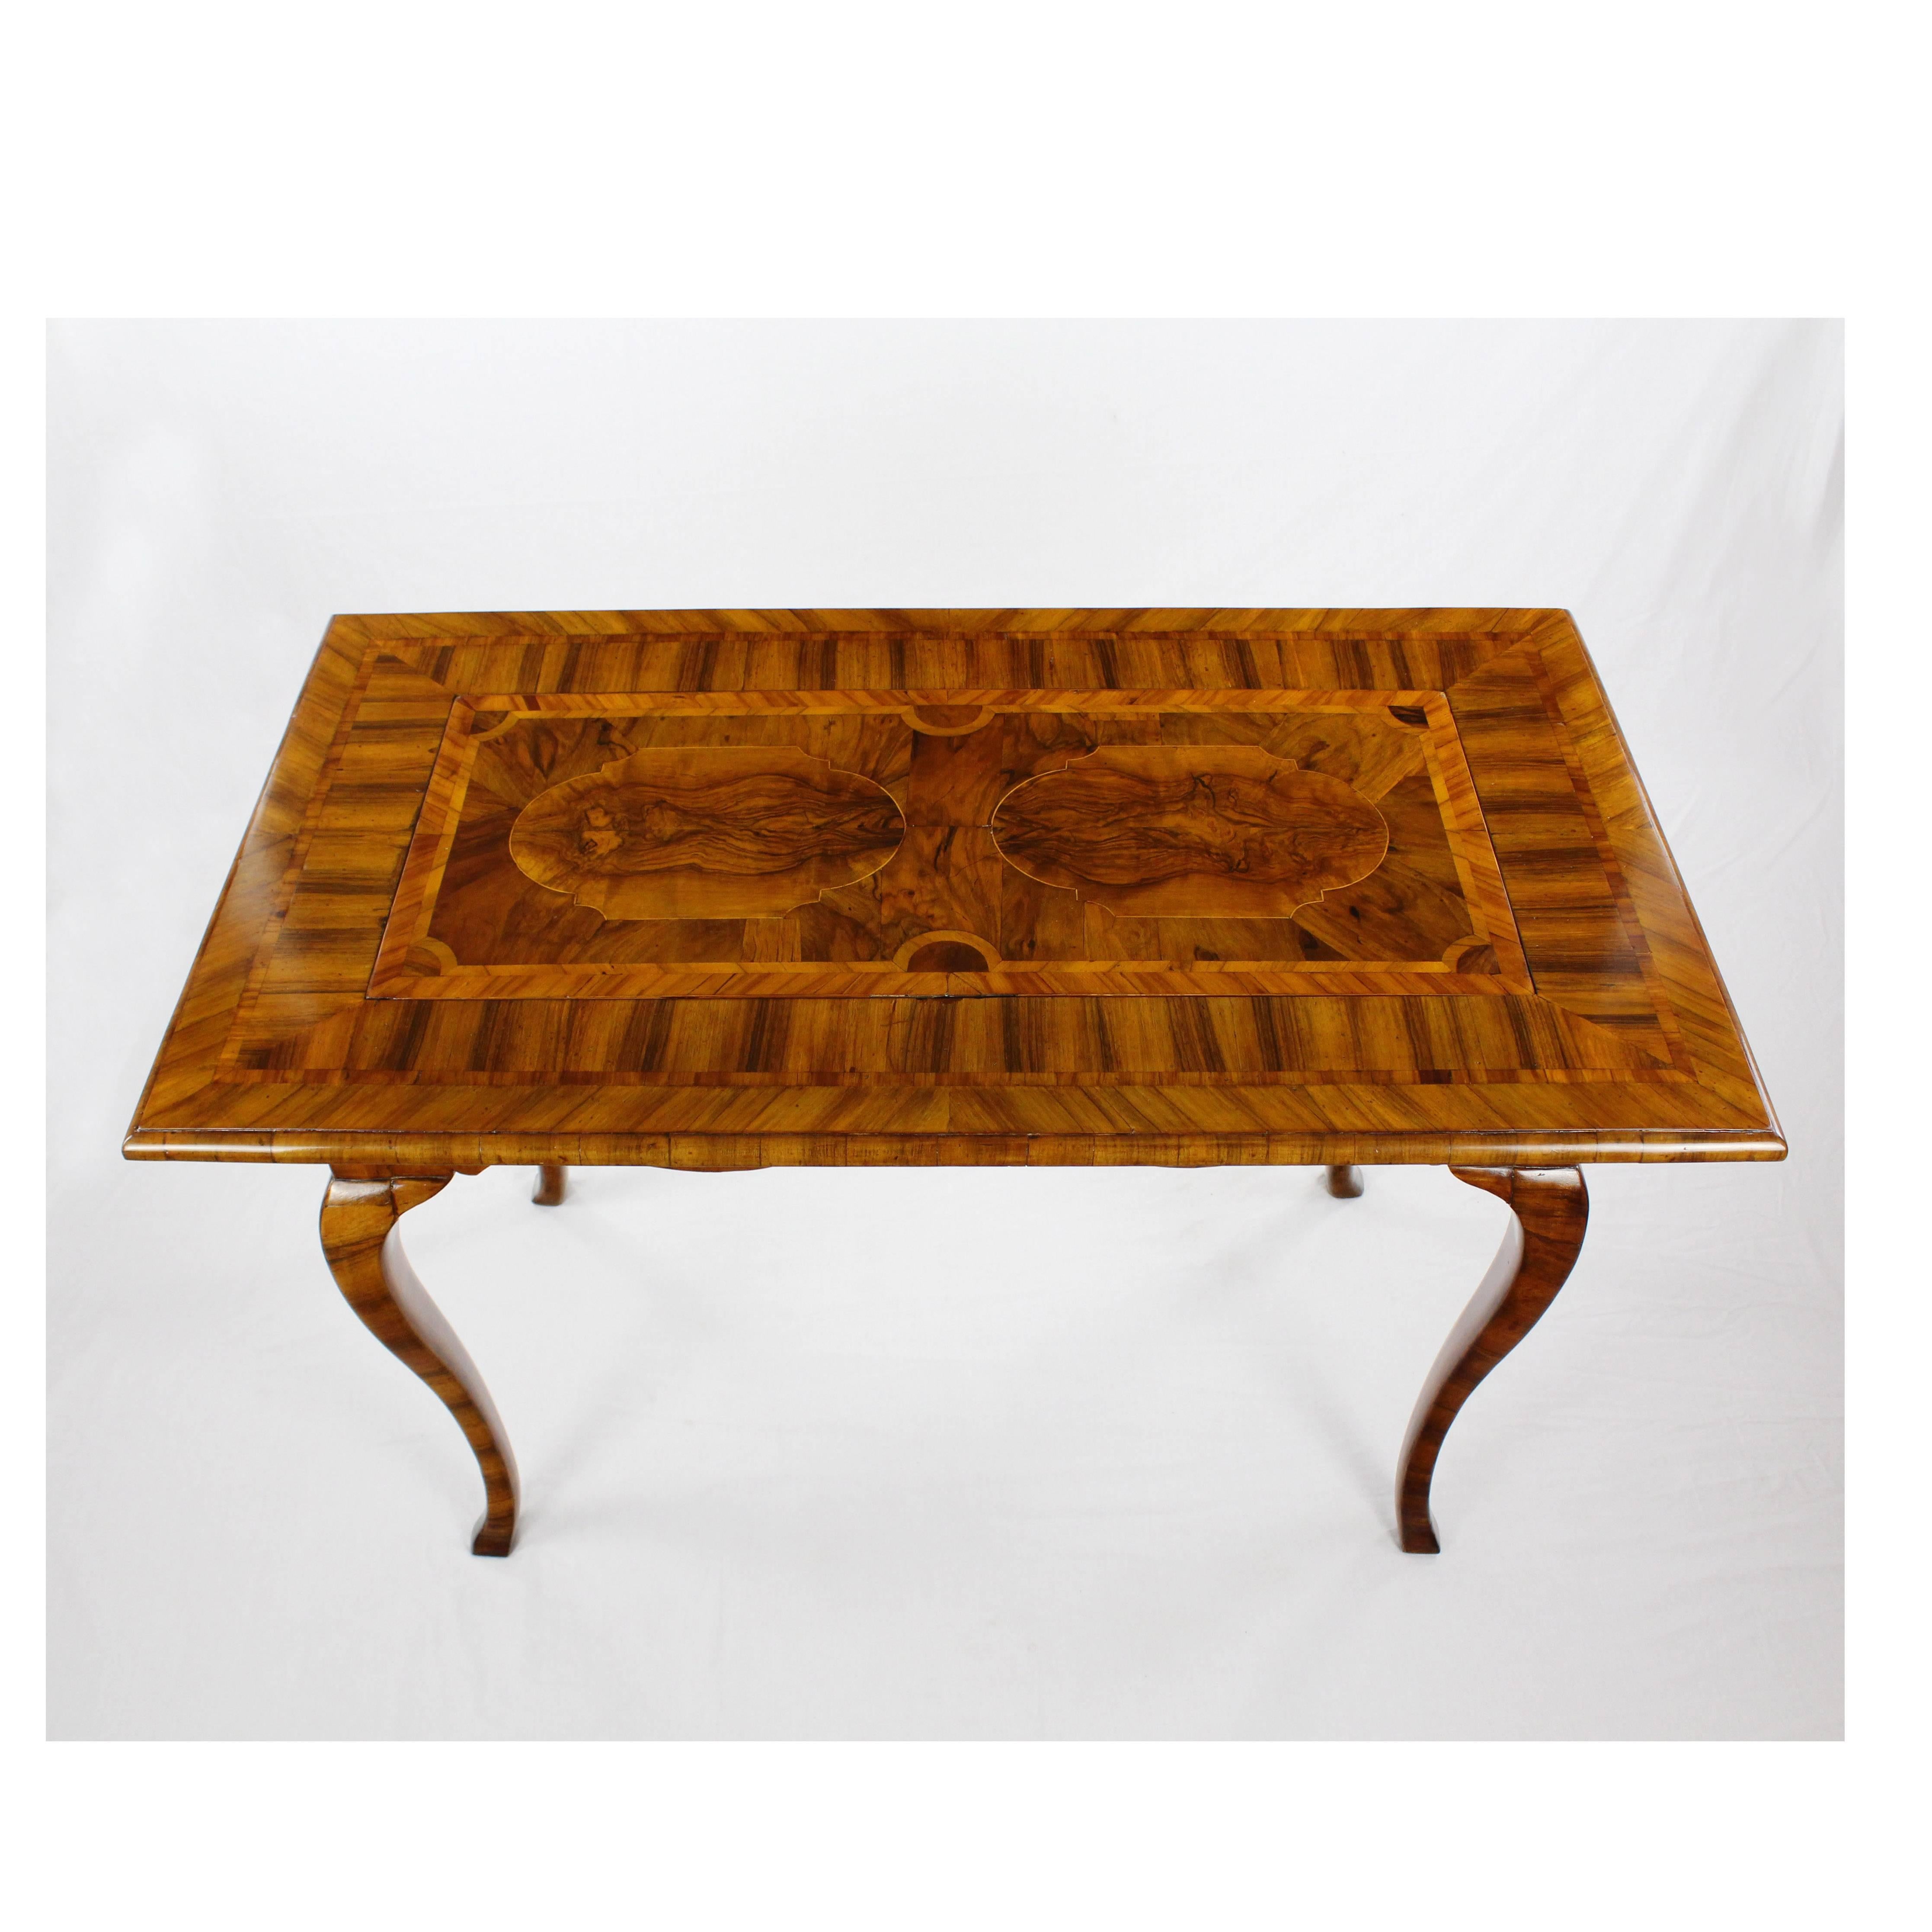 Nutwood Game Table or Baroque, circa 1760 for Chess Checkers, Merels, Backgammon For Sale